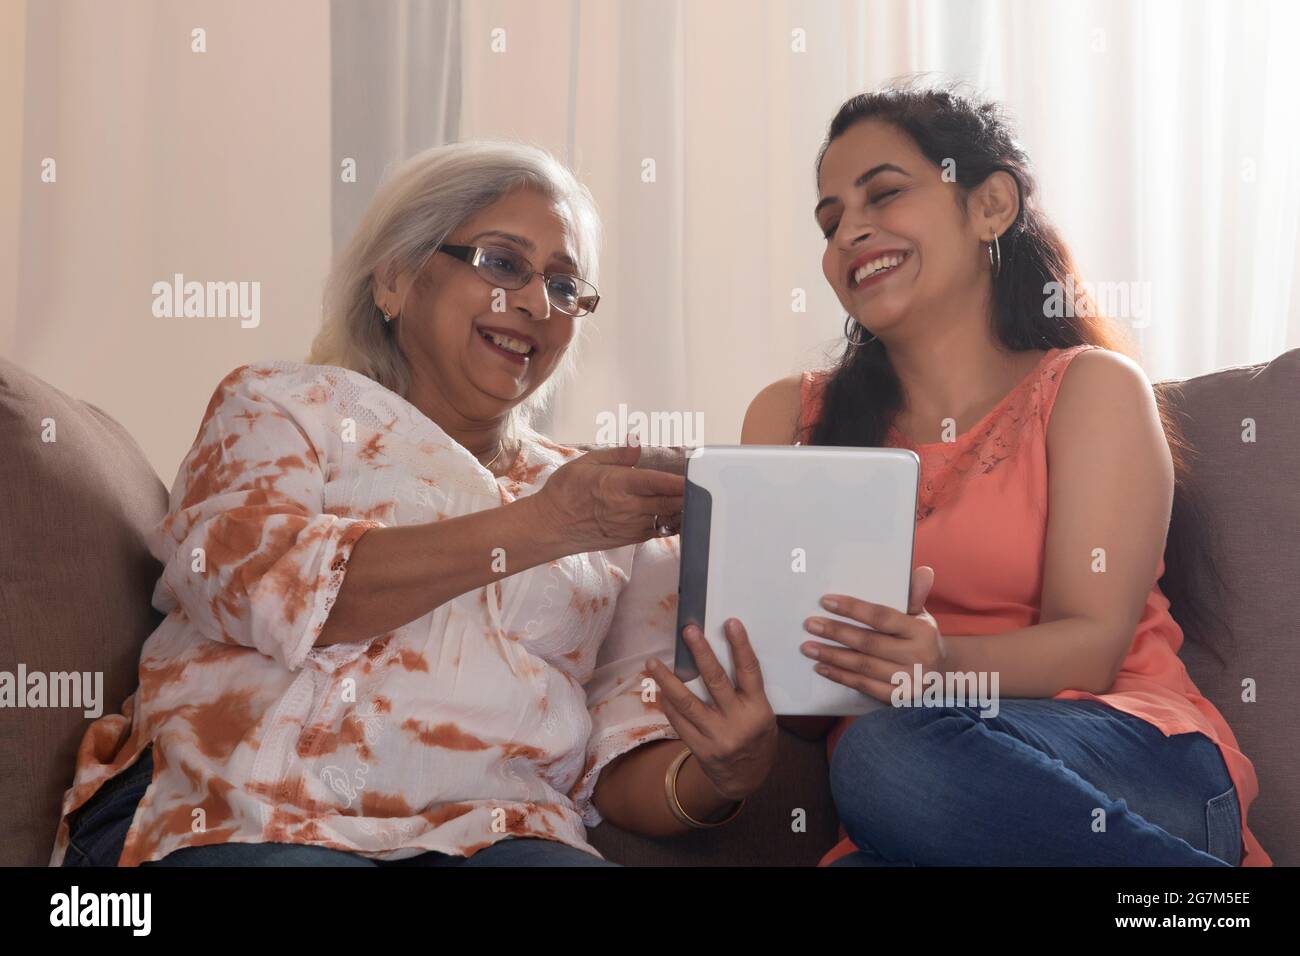 A DAUGHTER AND MOTHER USING A TABLET TO VIDEO CALL LOVED ONES Stock Photo